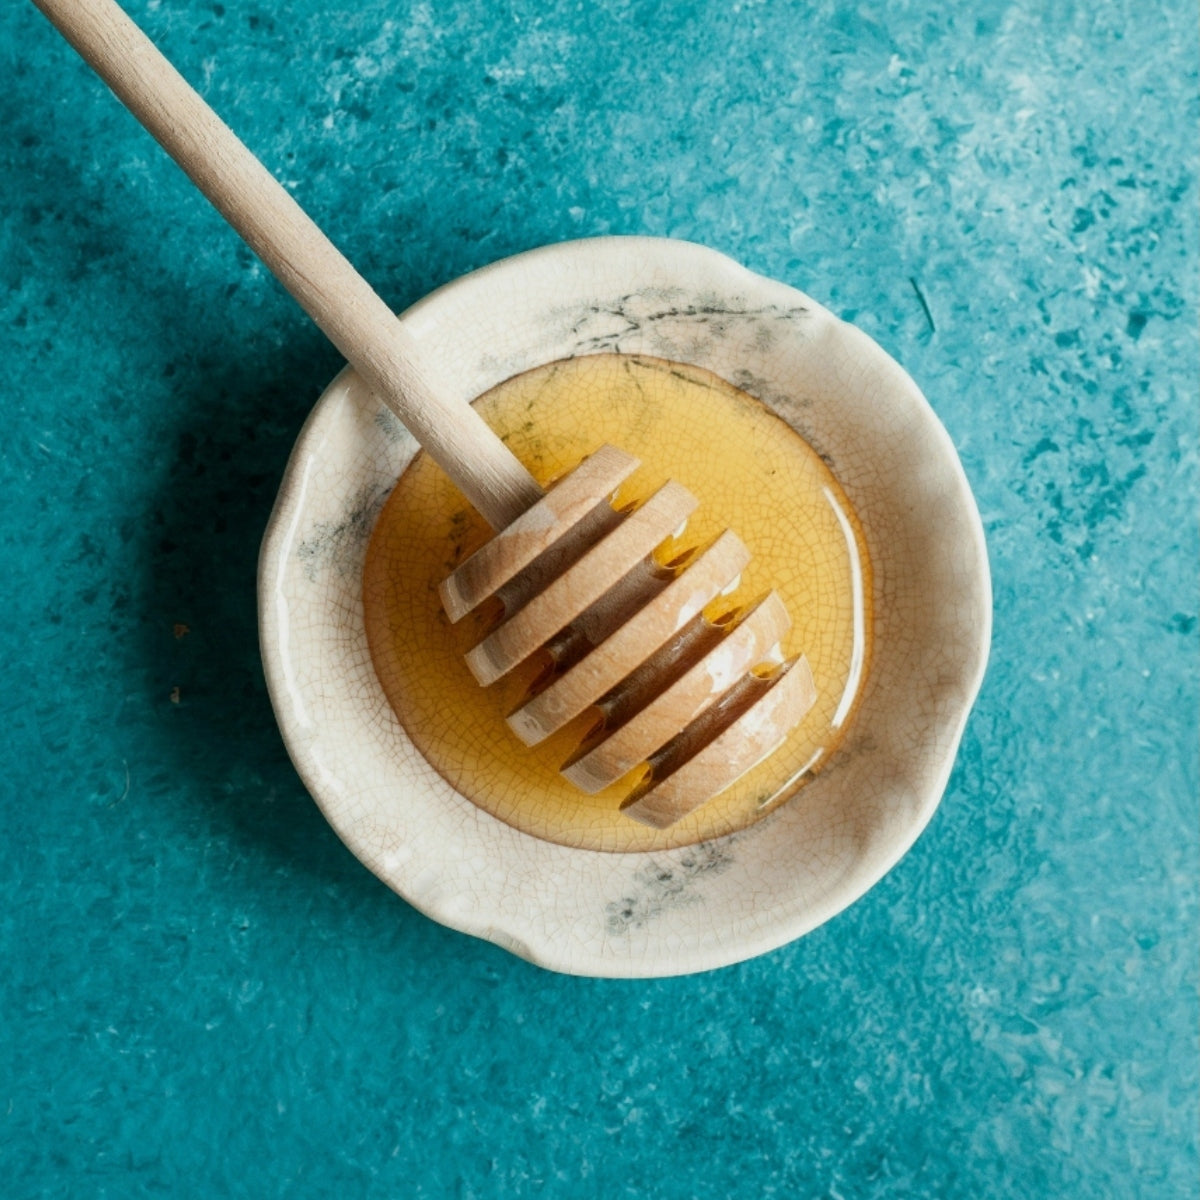 A honey stick in a bowl against a blue background.